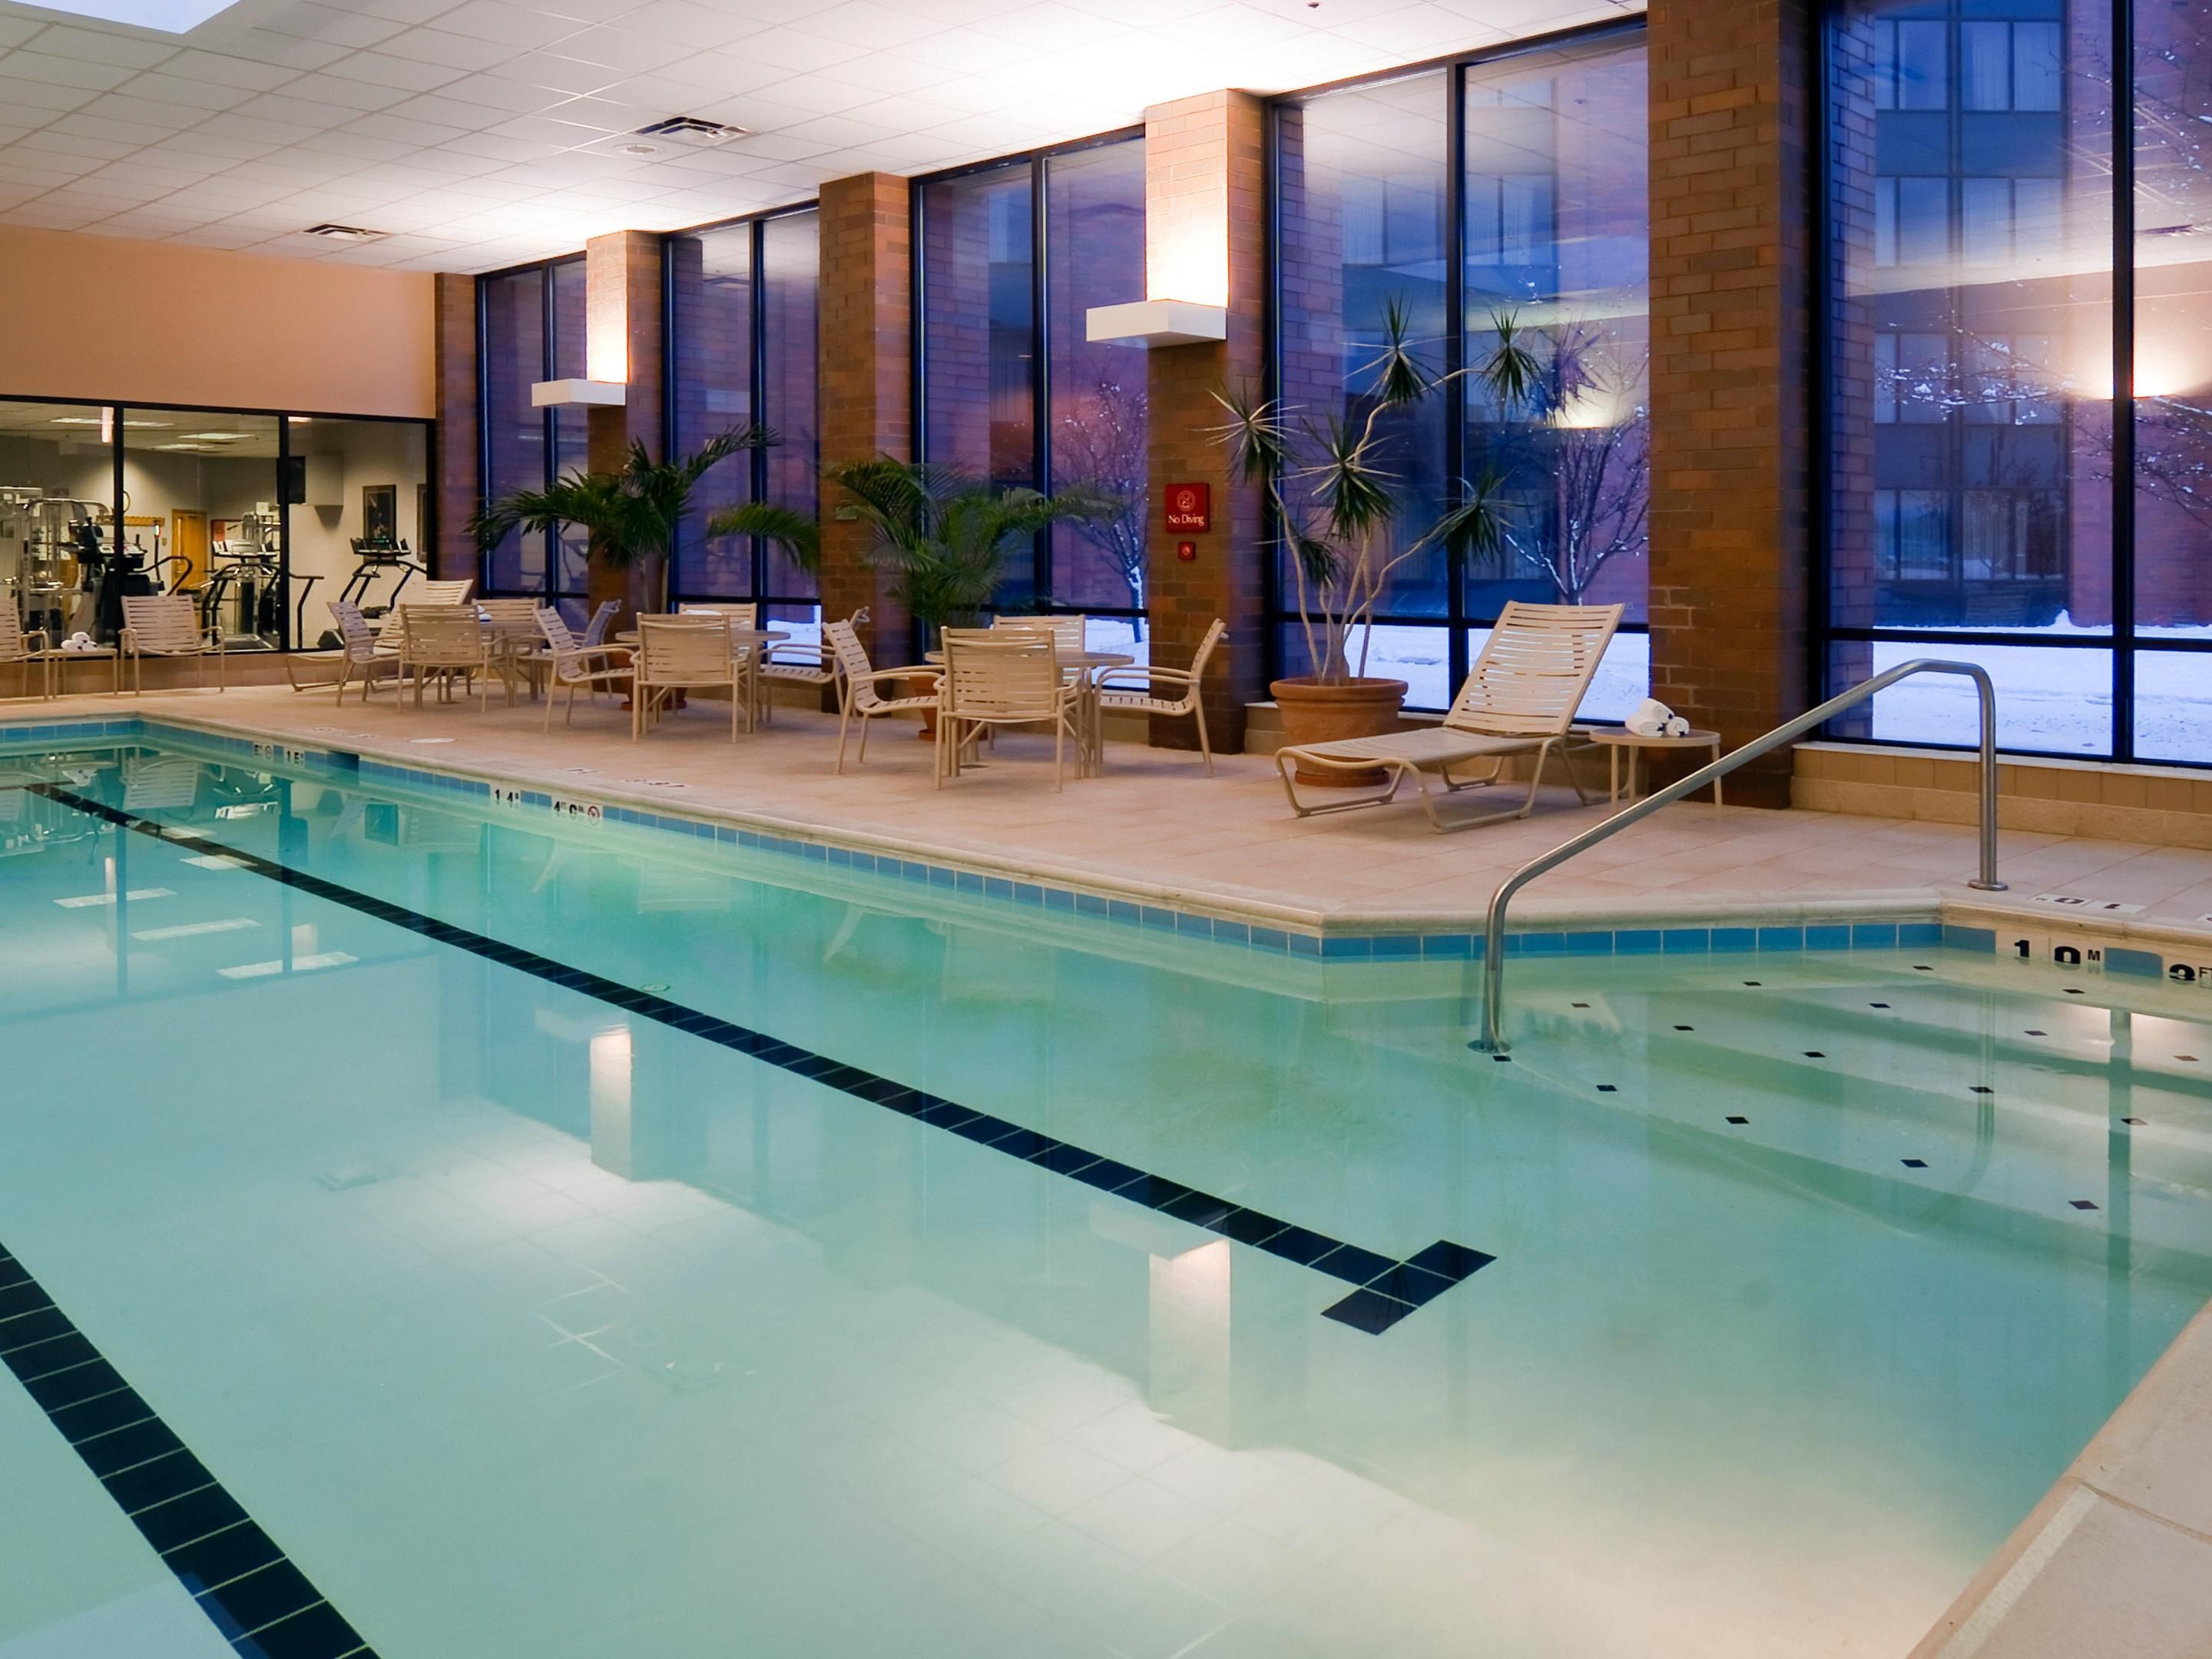 Our indoor swimming pool is a welcome oasis for relaxing, completing a work-out or splashing with the kids. 
Due to occupancy restrictions, please see the front desk to reserve your time at our pool. 